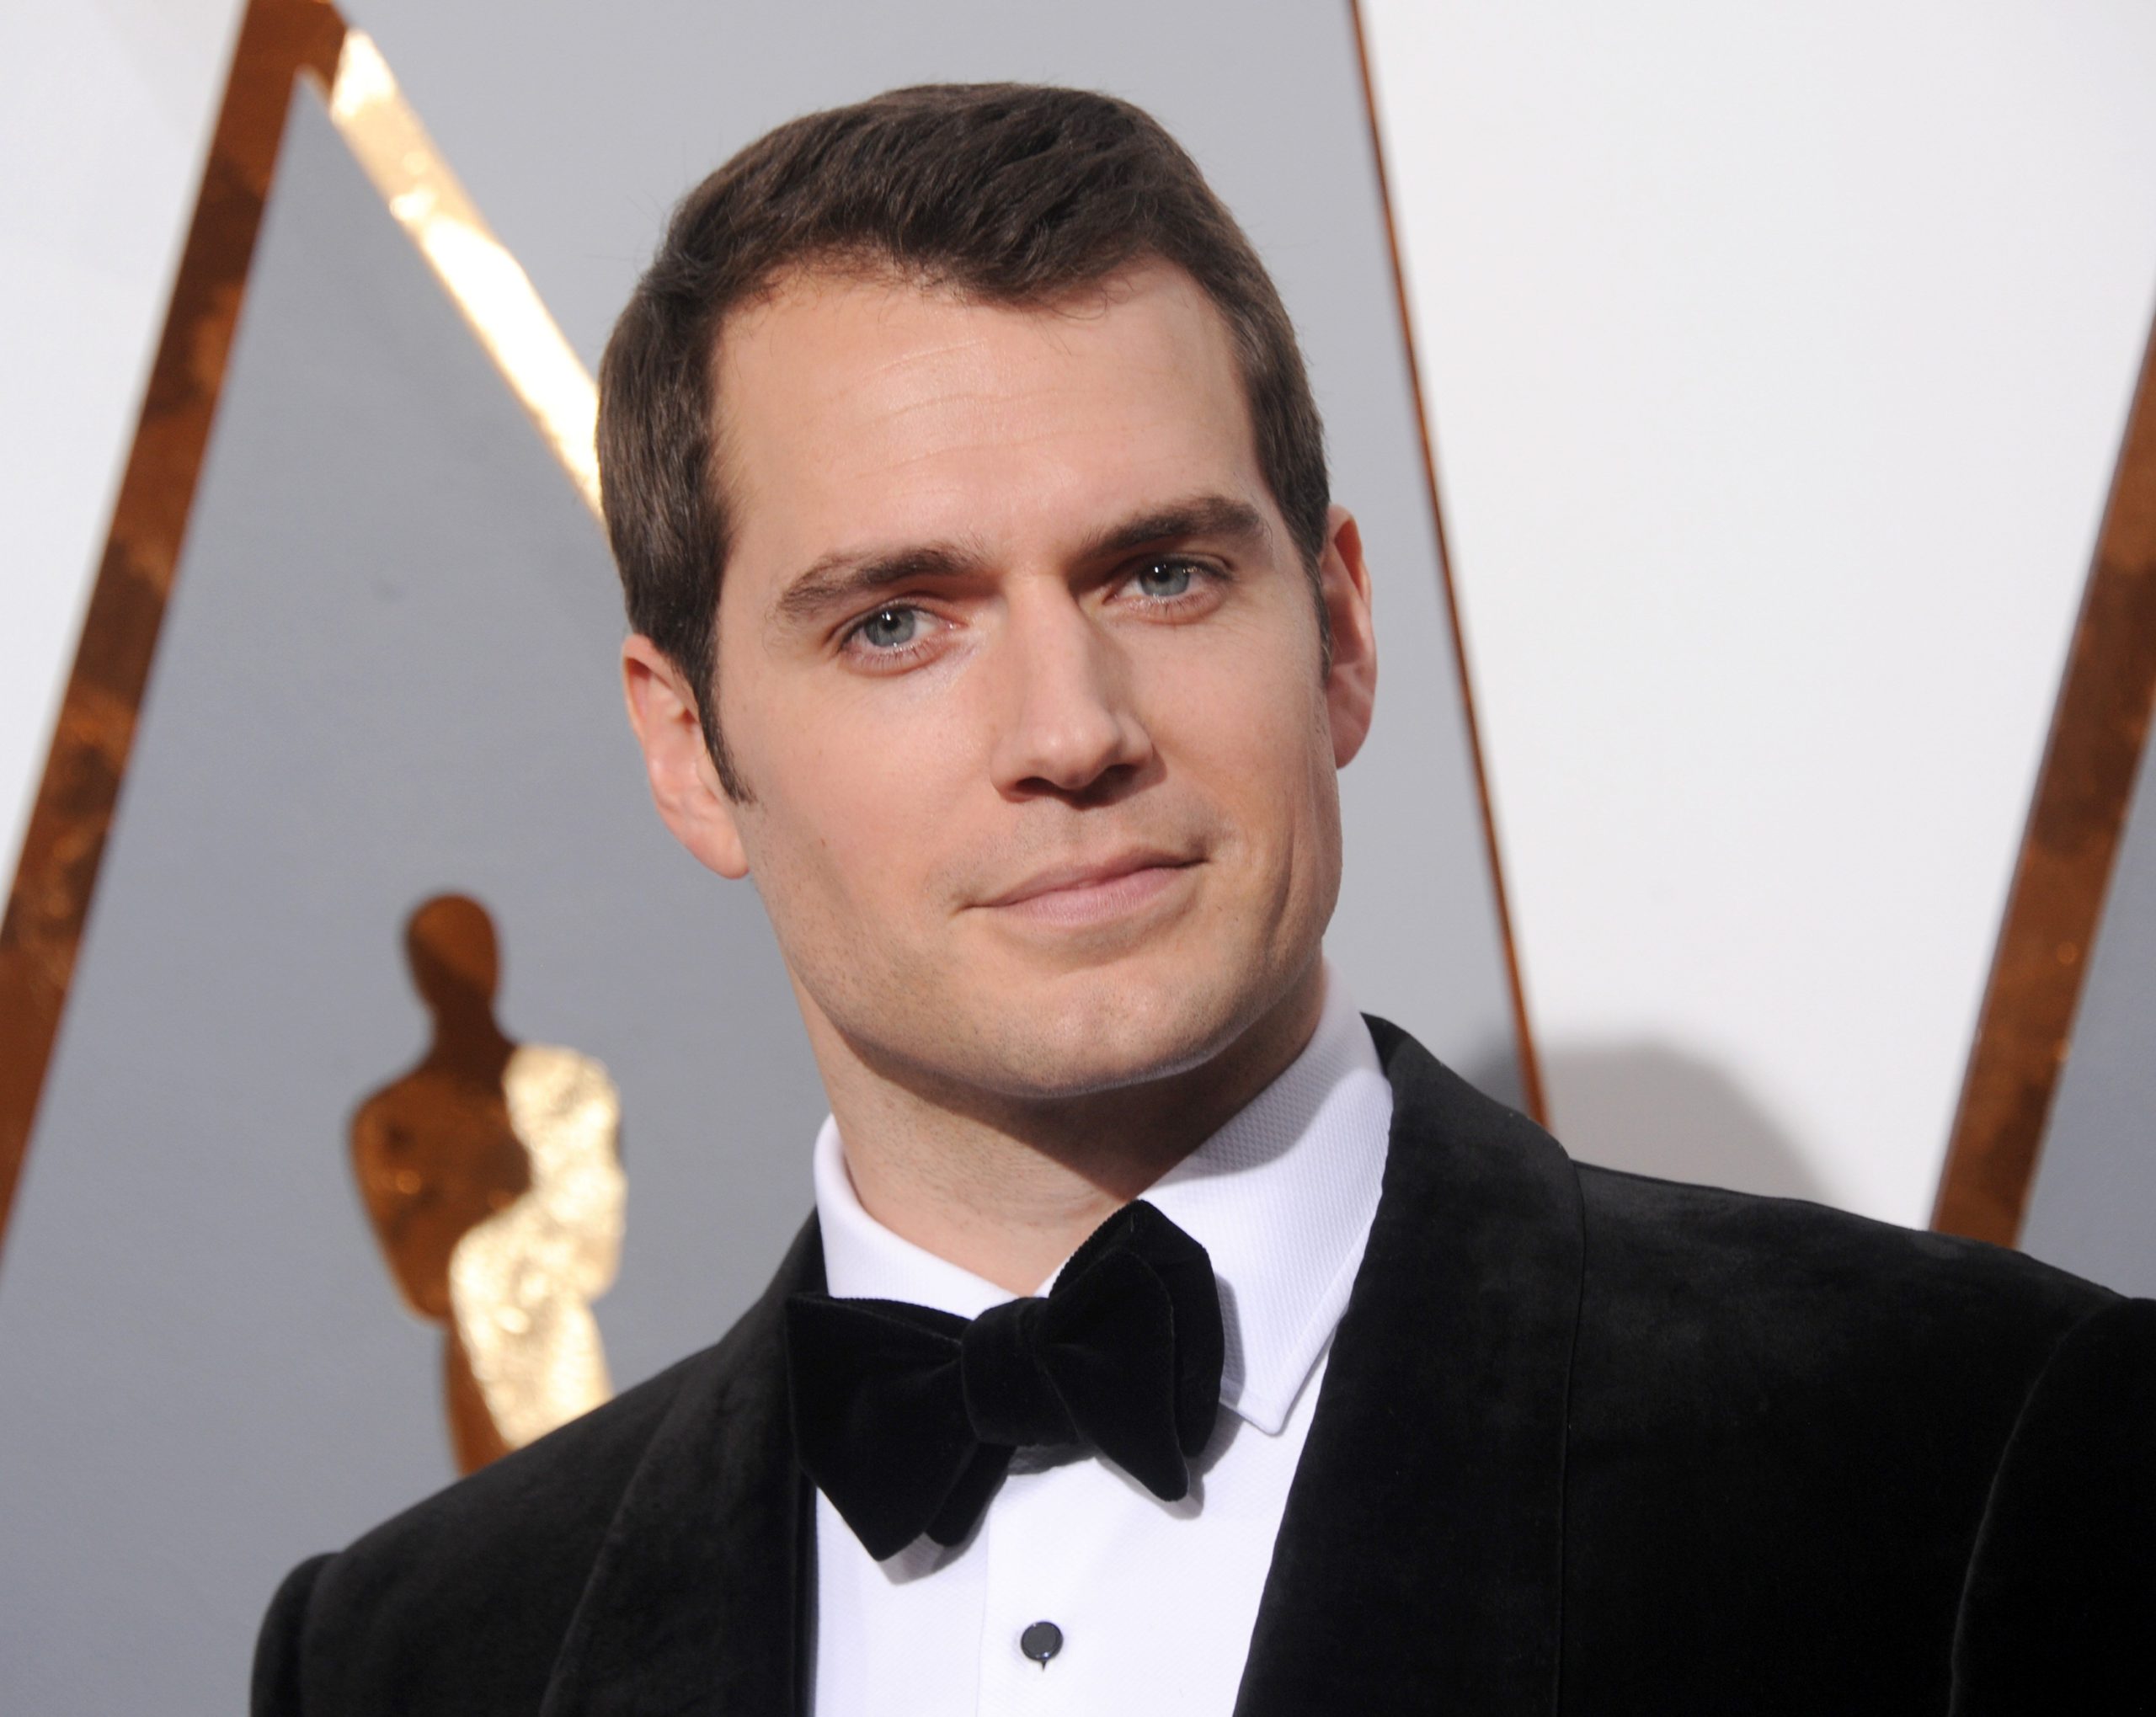 Is Henry Cavill Qualified to Be the Next James Bond?